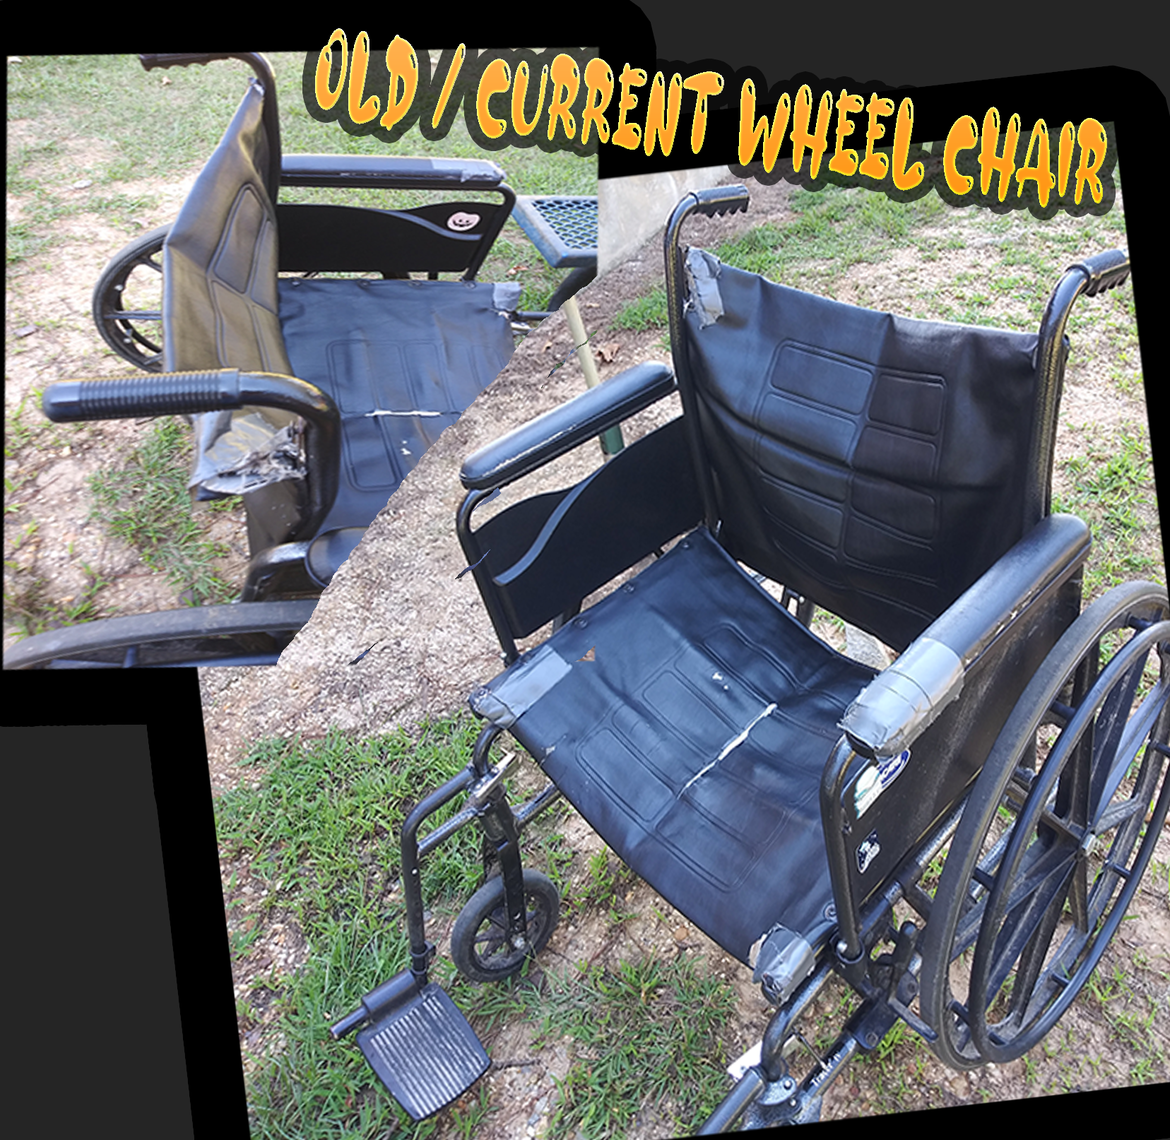 My current wheelchair, It's slowly breaking down and is sort of held together by ductape...